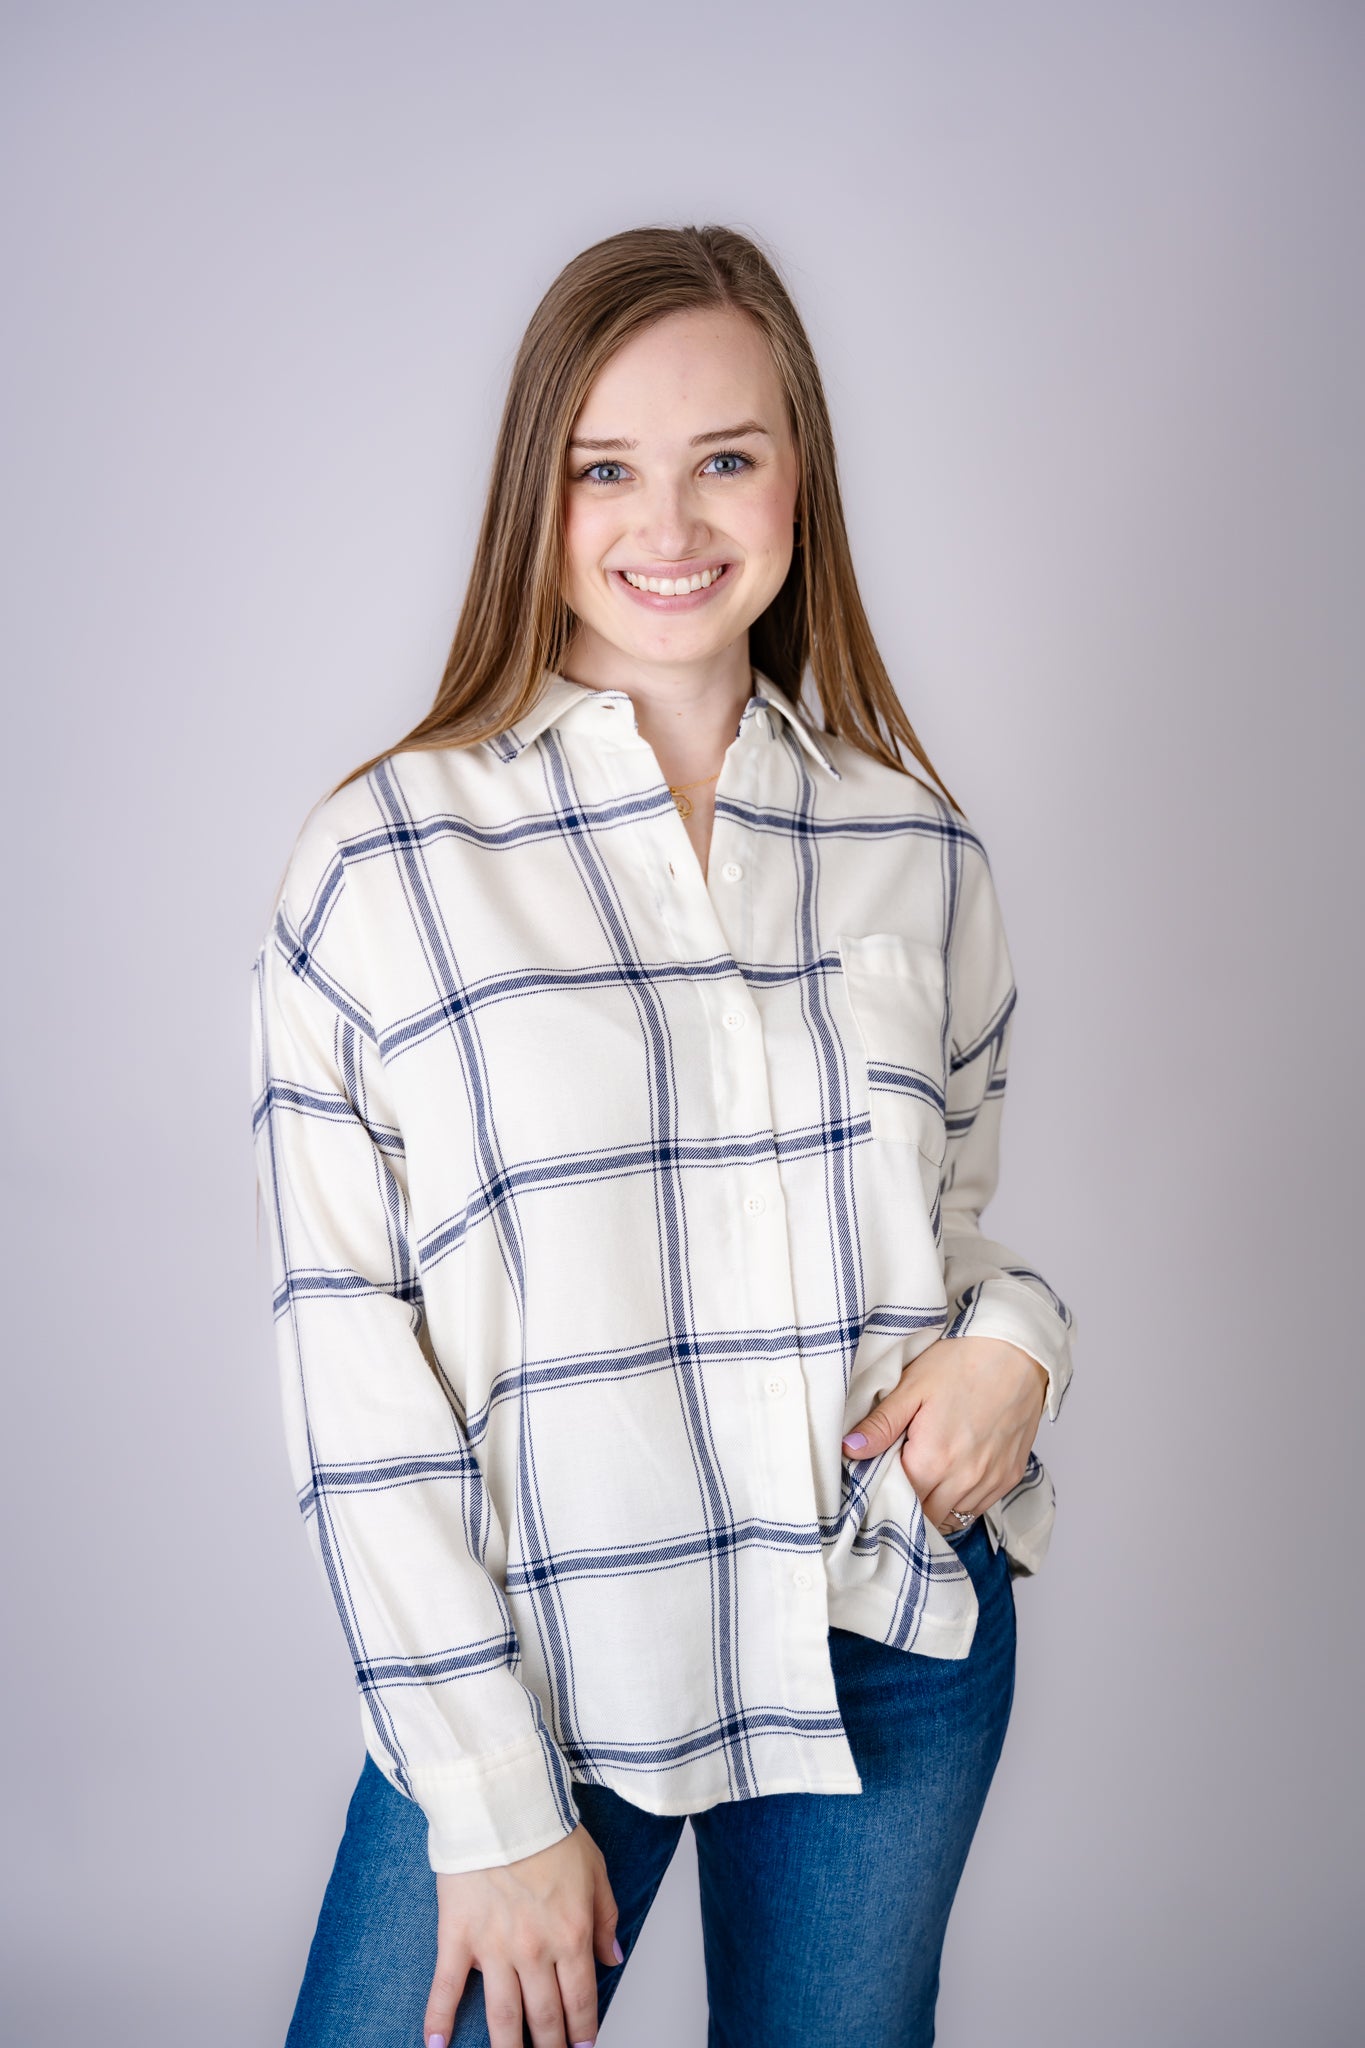 Z Supply River Plaid Button Up